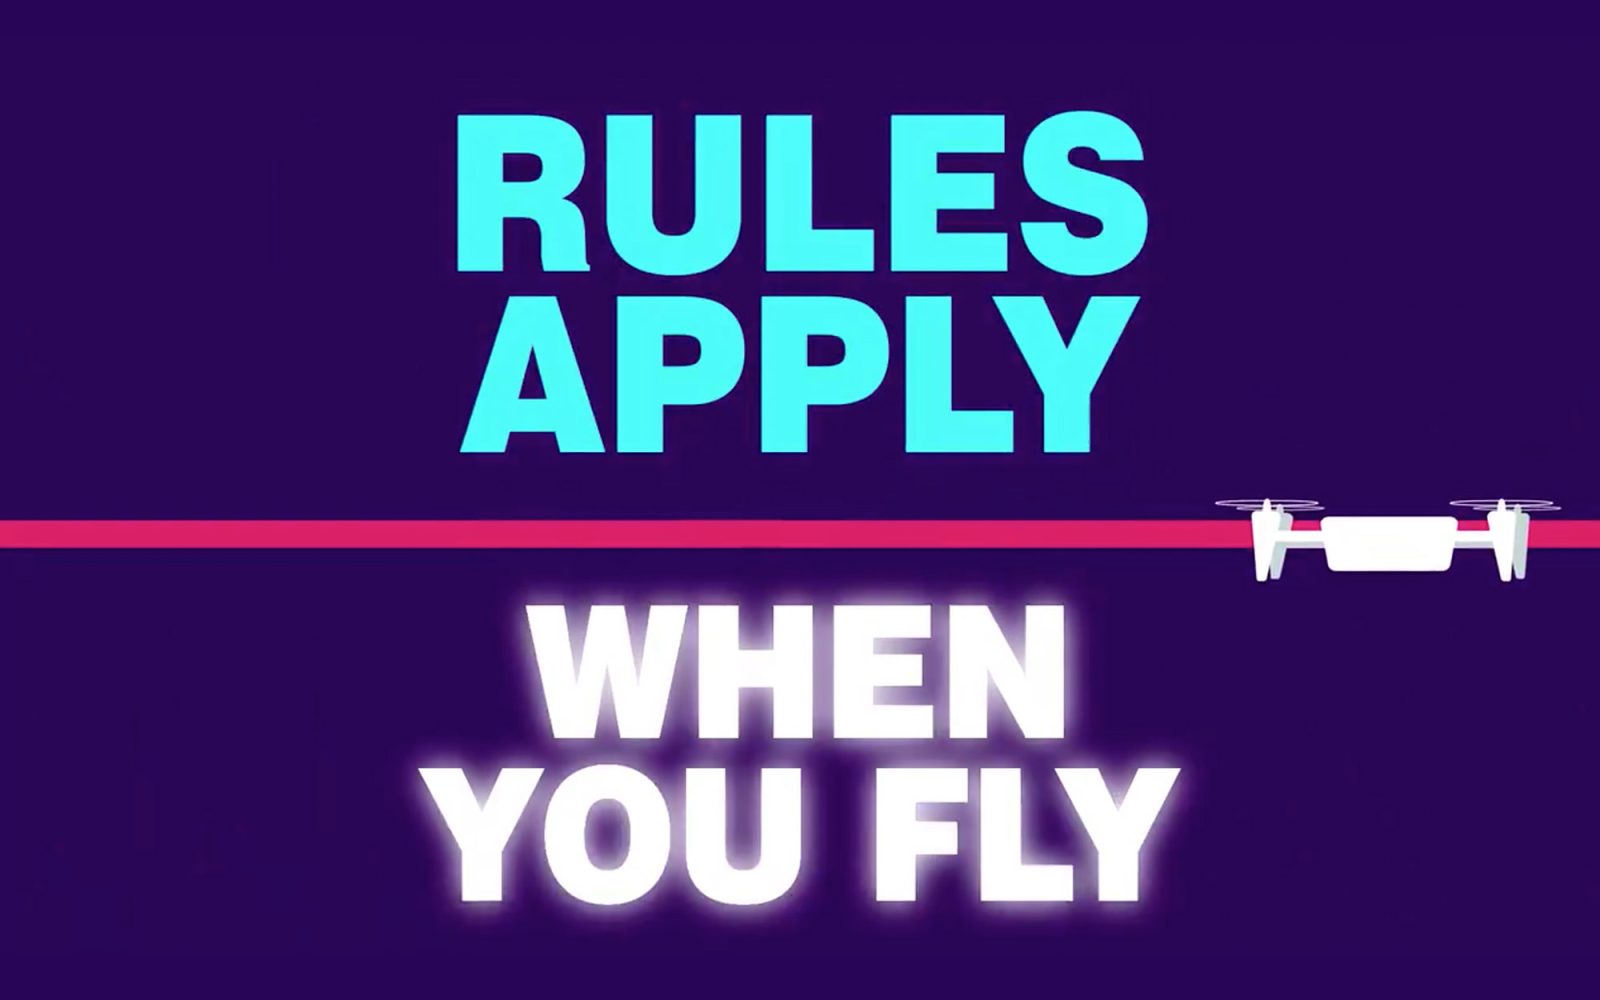 Australian aviation authority, CASA launches new campaign to increase awareness of rules for new drone pilots. Rules apply, when you fly!